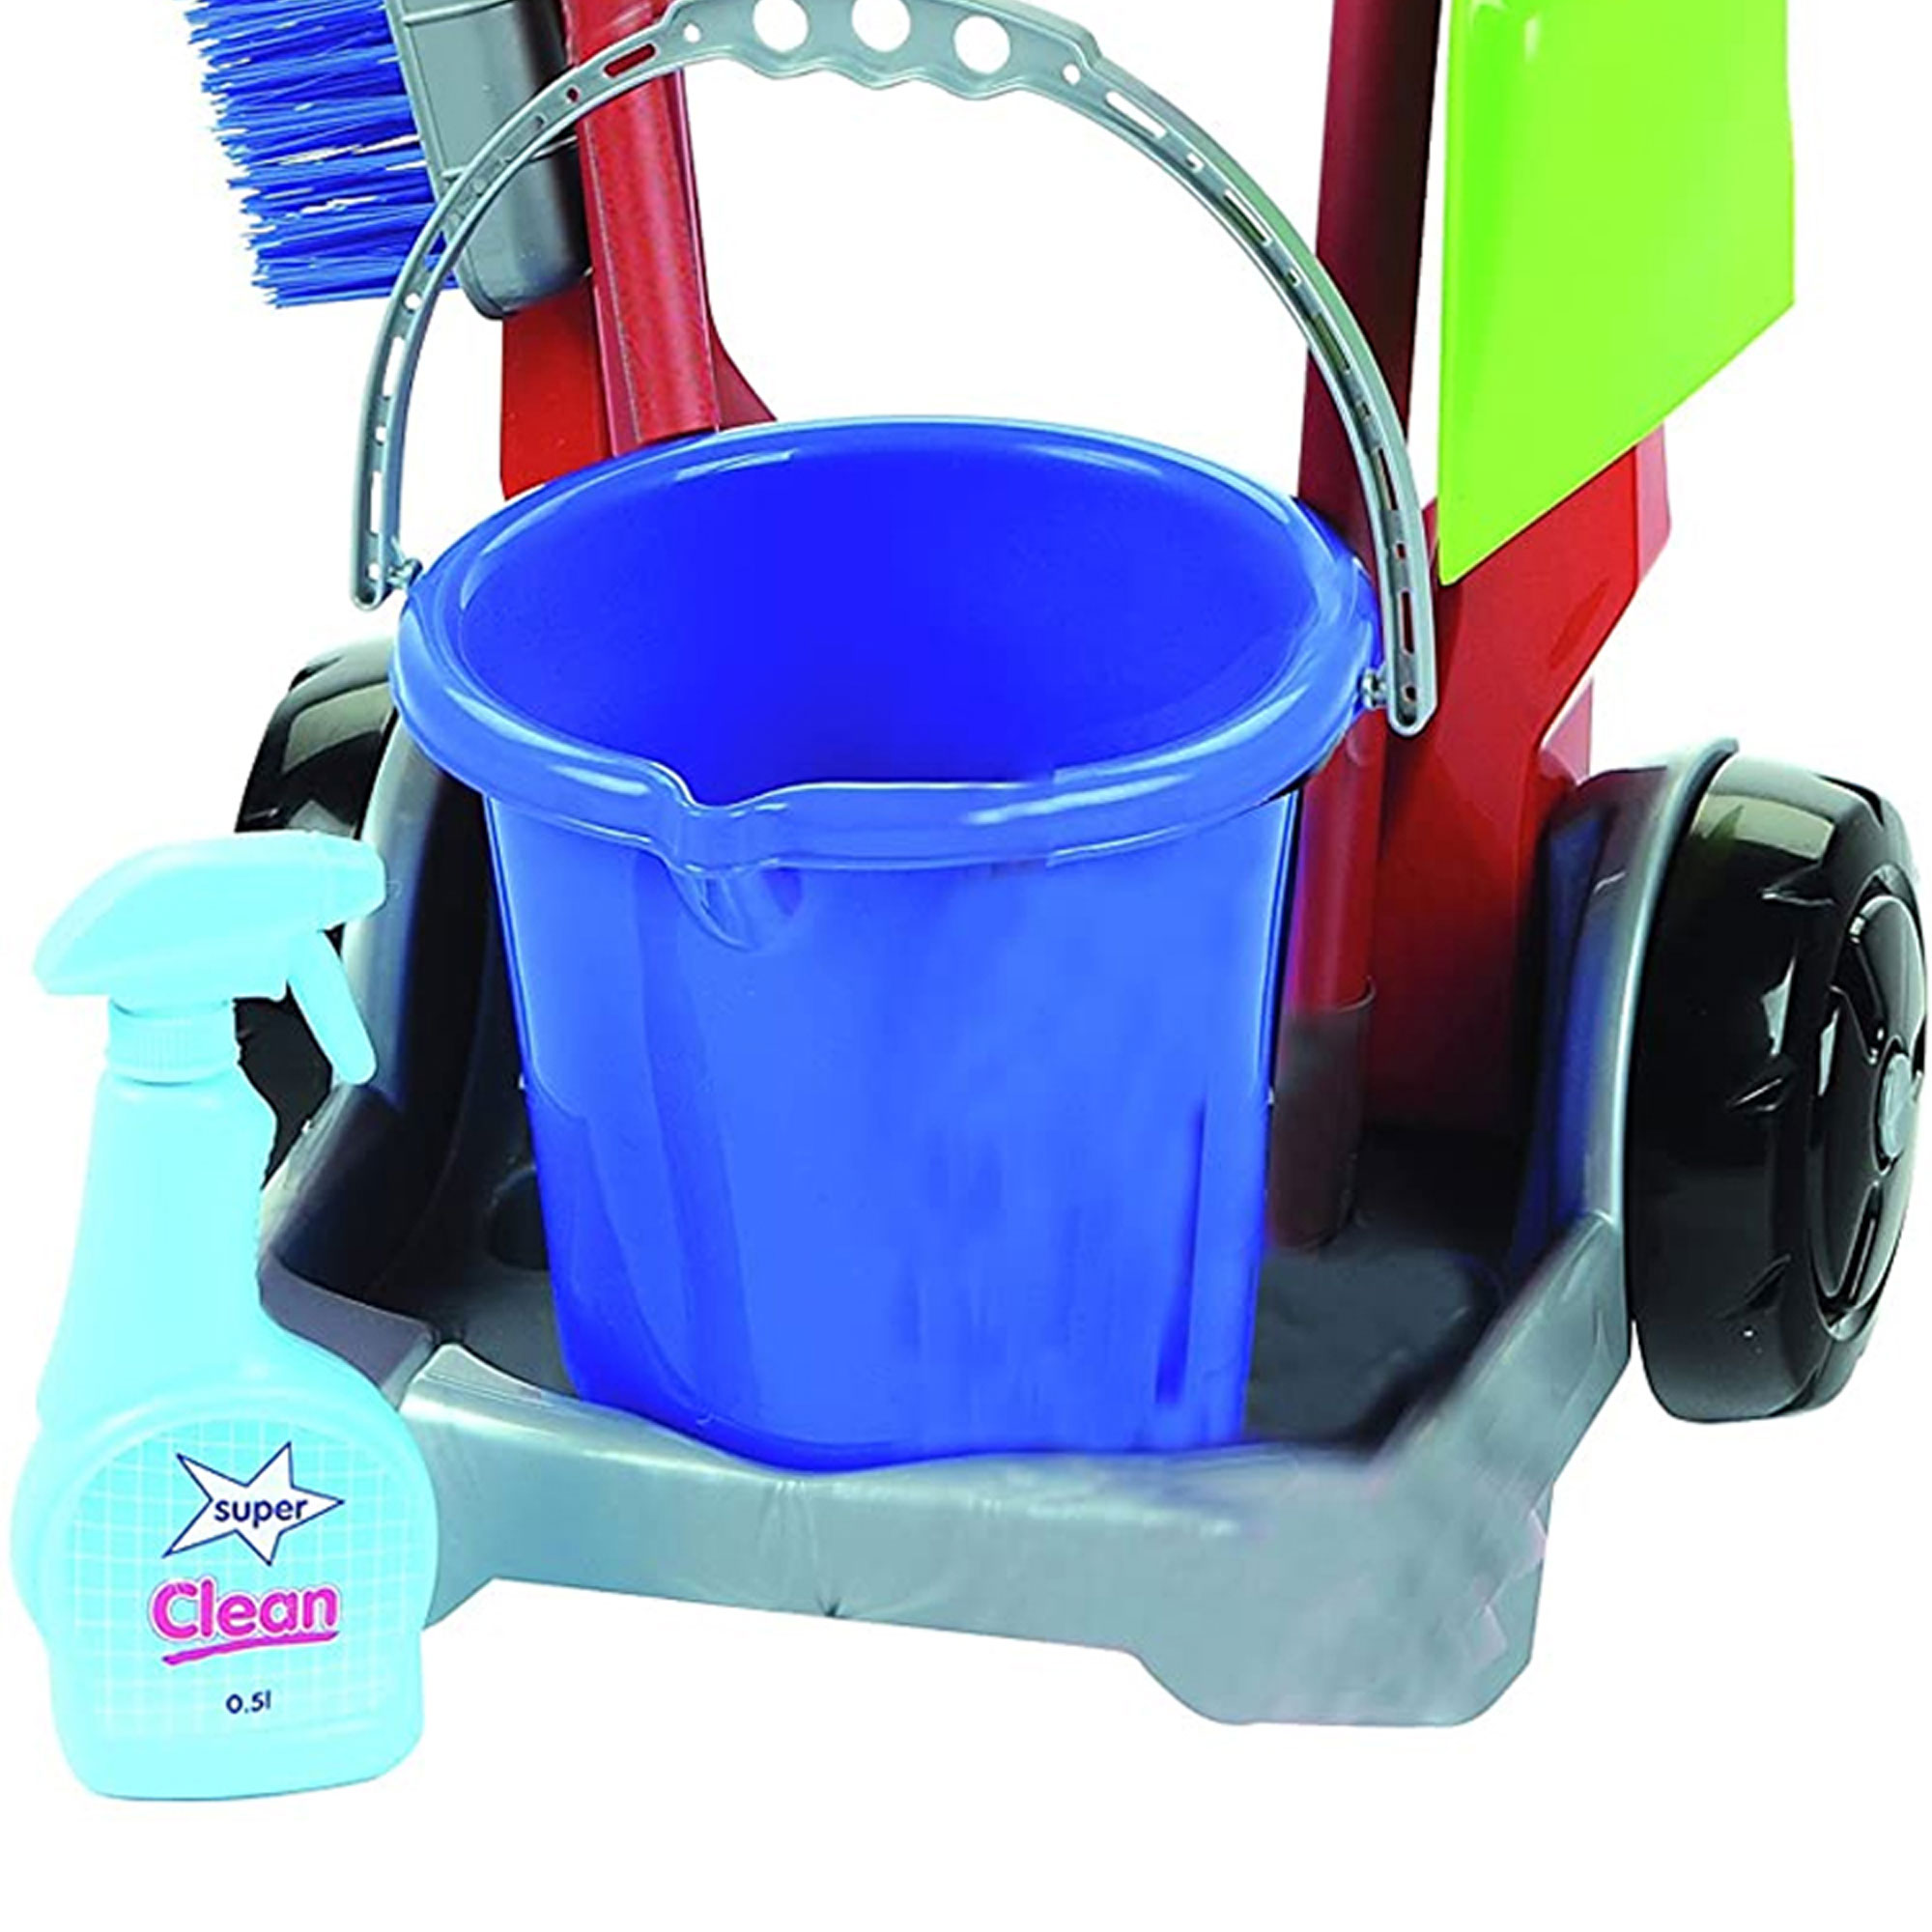 Theo Klein: Cleaning Trolley Set - Kid's 8 Piece Toy Set Includes: Trolley, Bucket, Mop, Broom, Dustpan w/ Brush, Bottle & Detergent Box, Kids Pretend Play, Ages 3+ - image 4 of 5